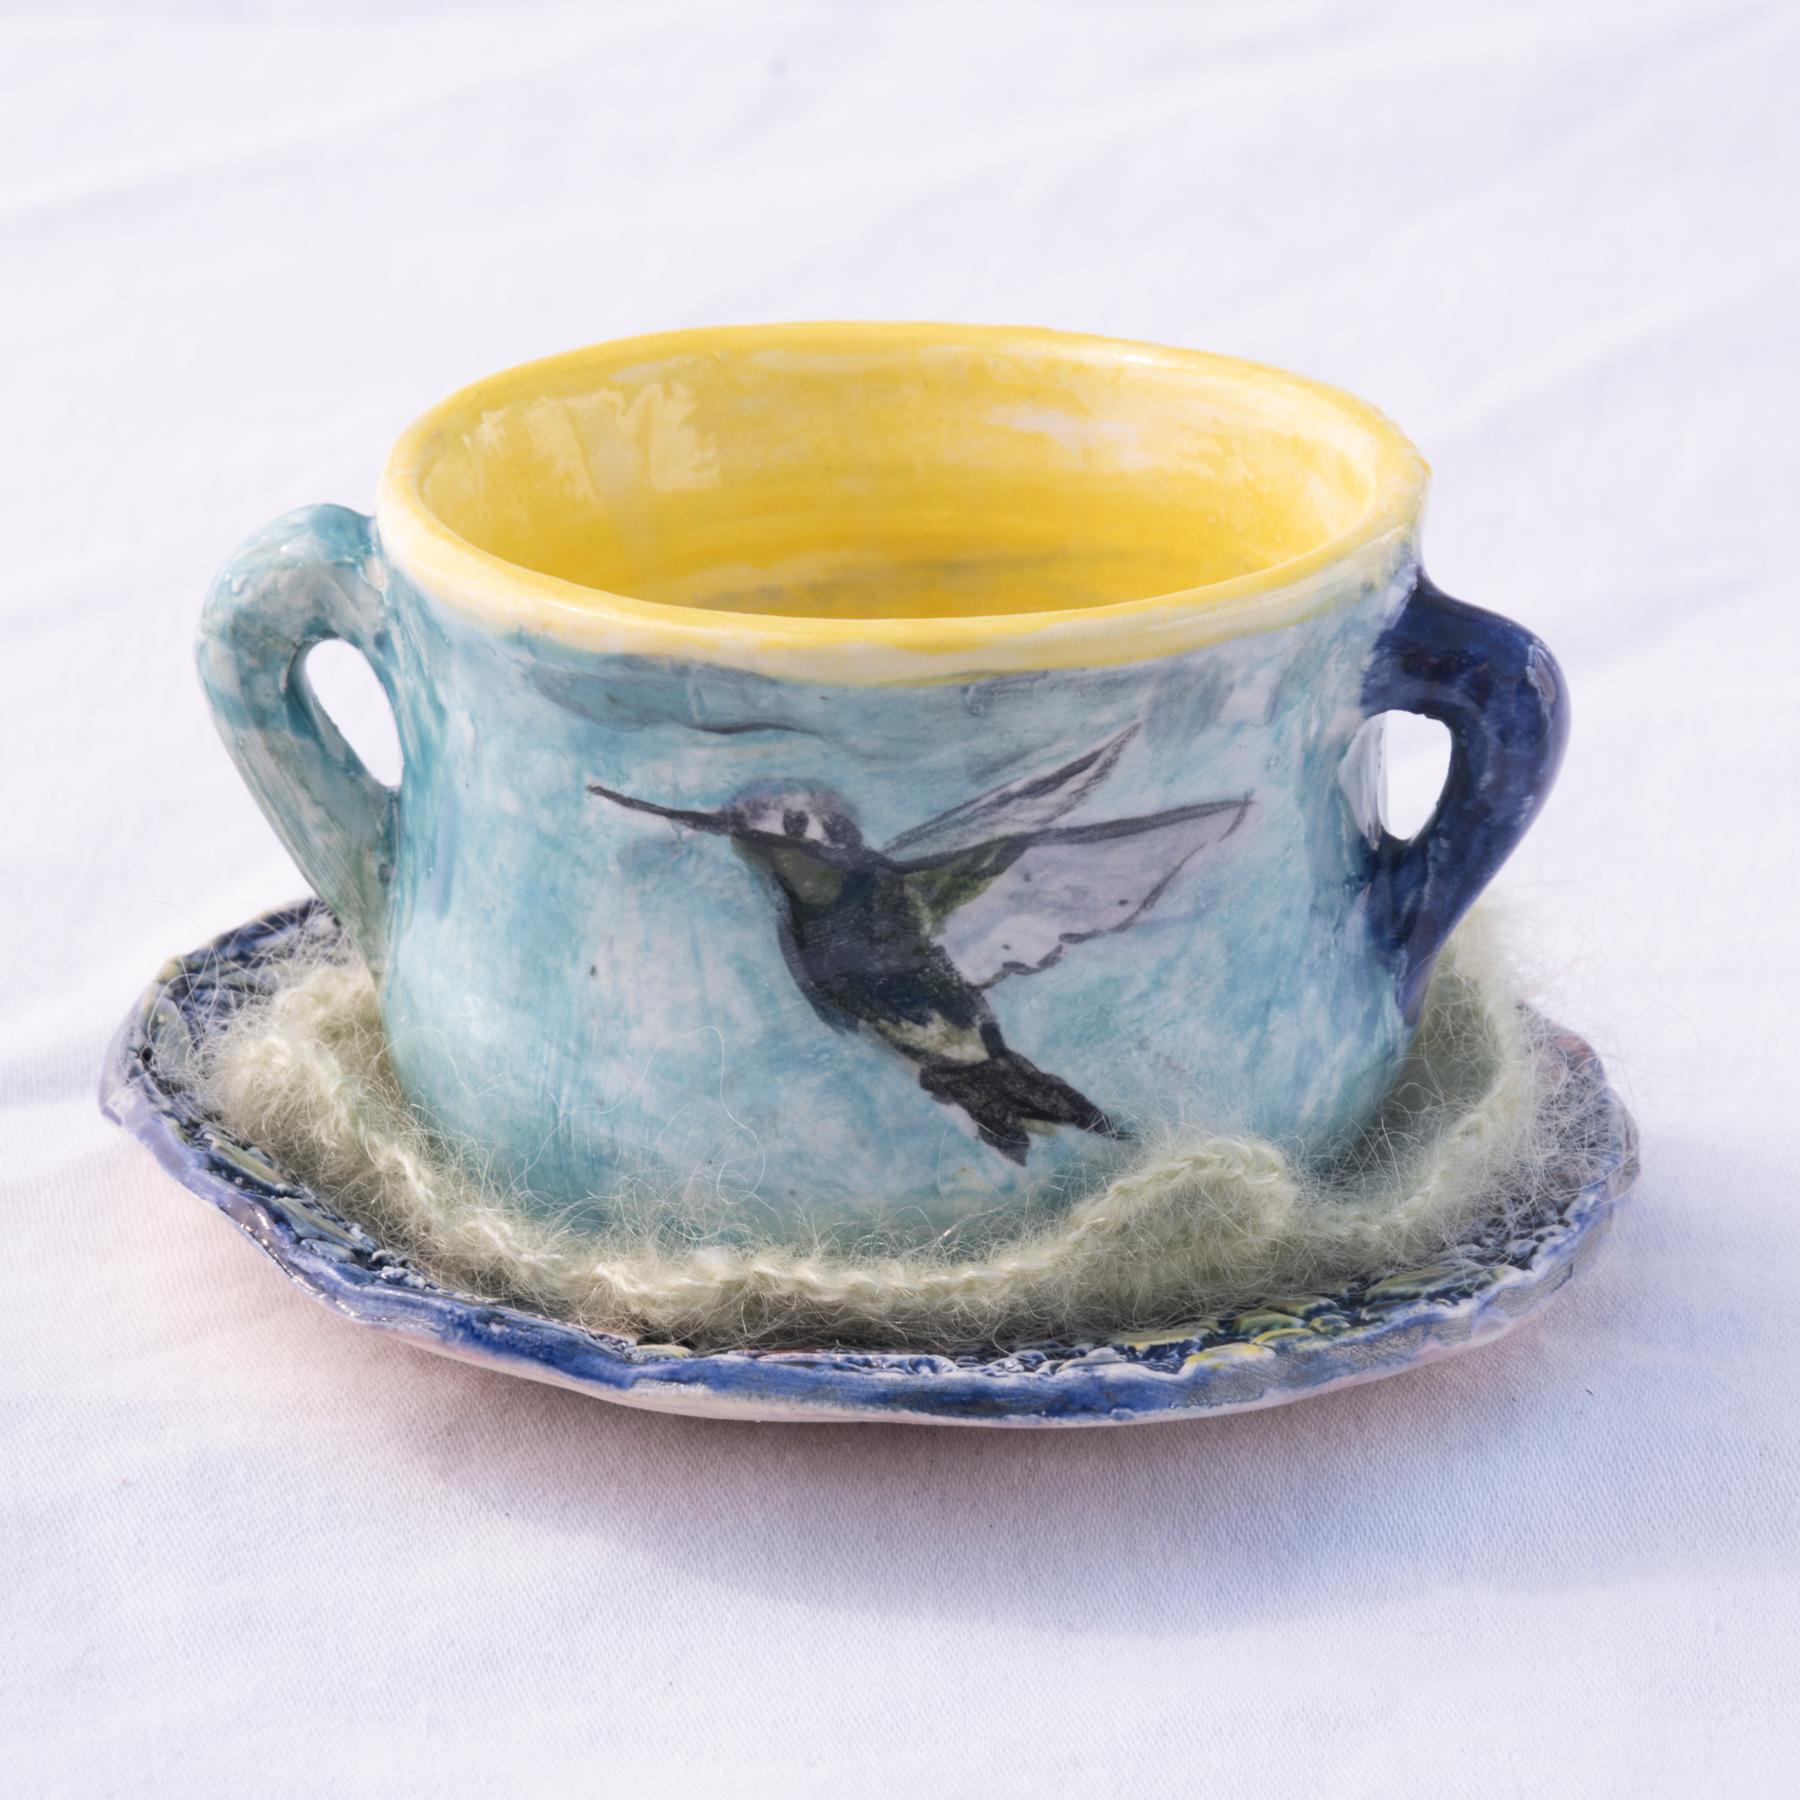 Sascha Mallon’s stoneware tea set, “After the Rain” features a hand-painted underglaze of soaring ravens and swallows on the central teapot.  Each of the accompanying teacups (nestled on cashmere crocheted doilies) depict a different bird: a